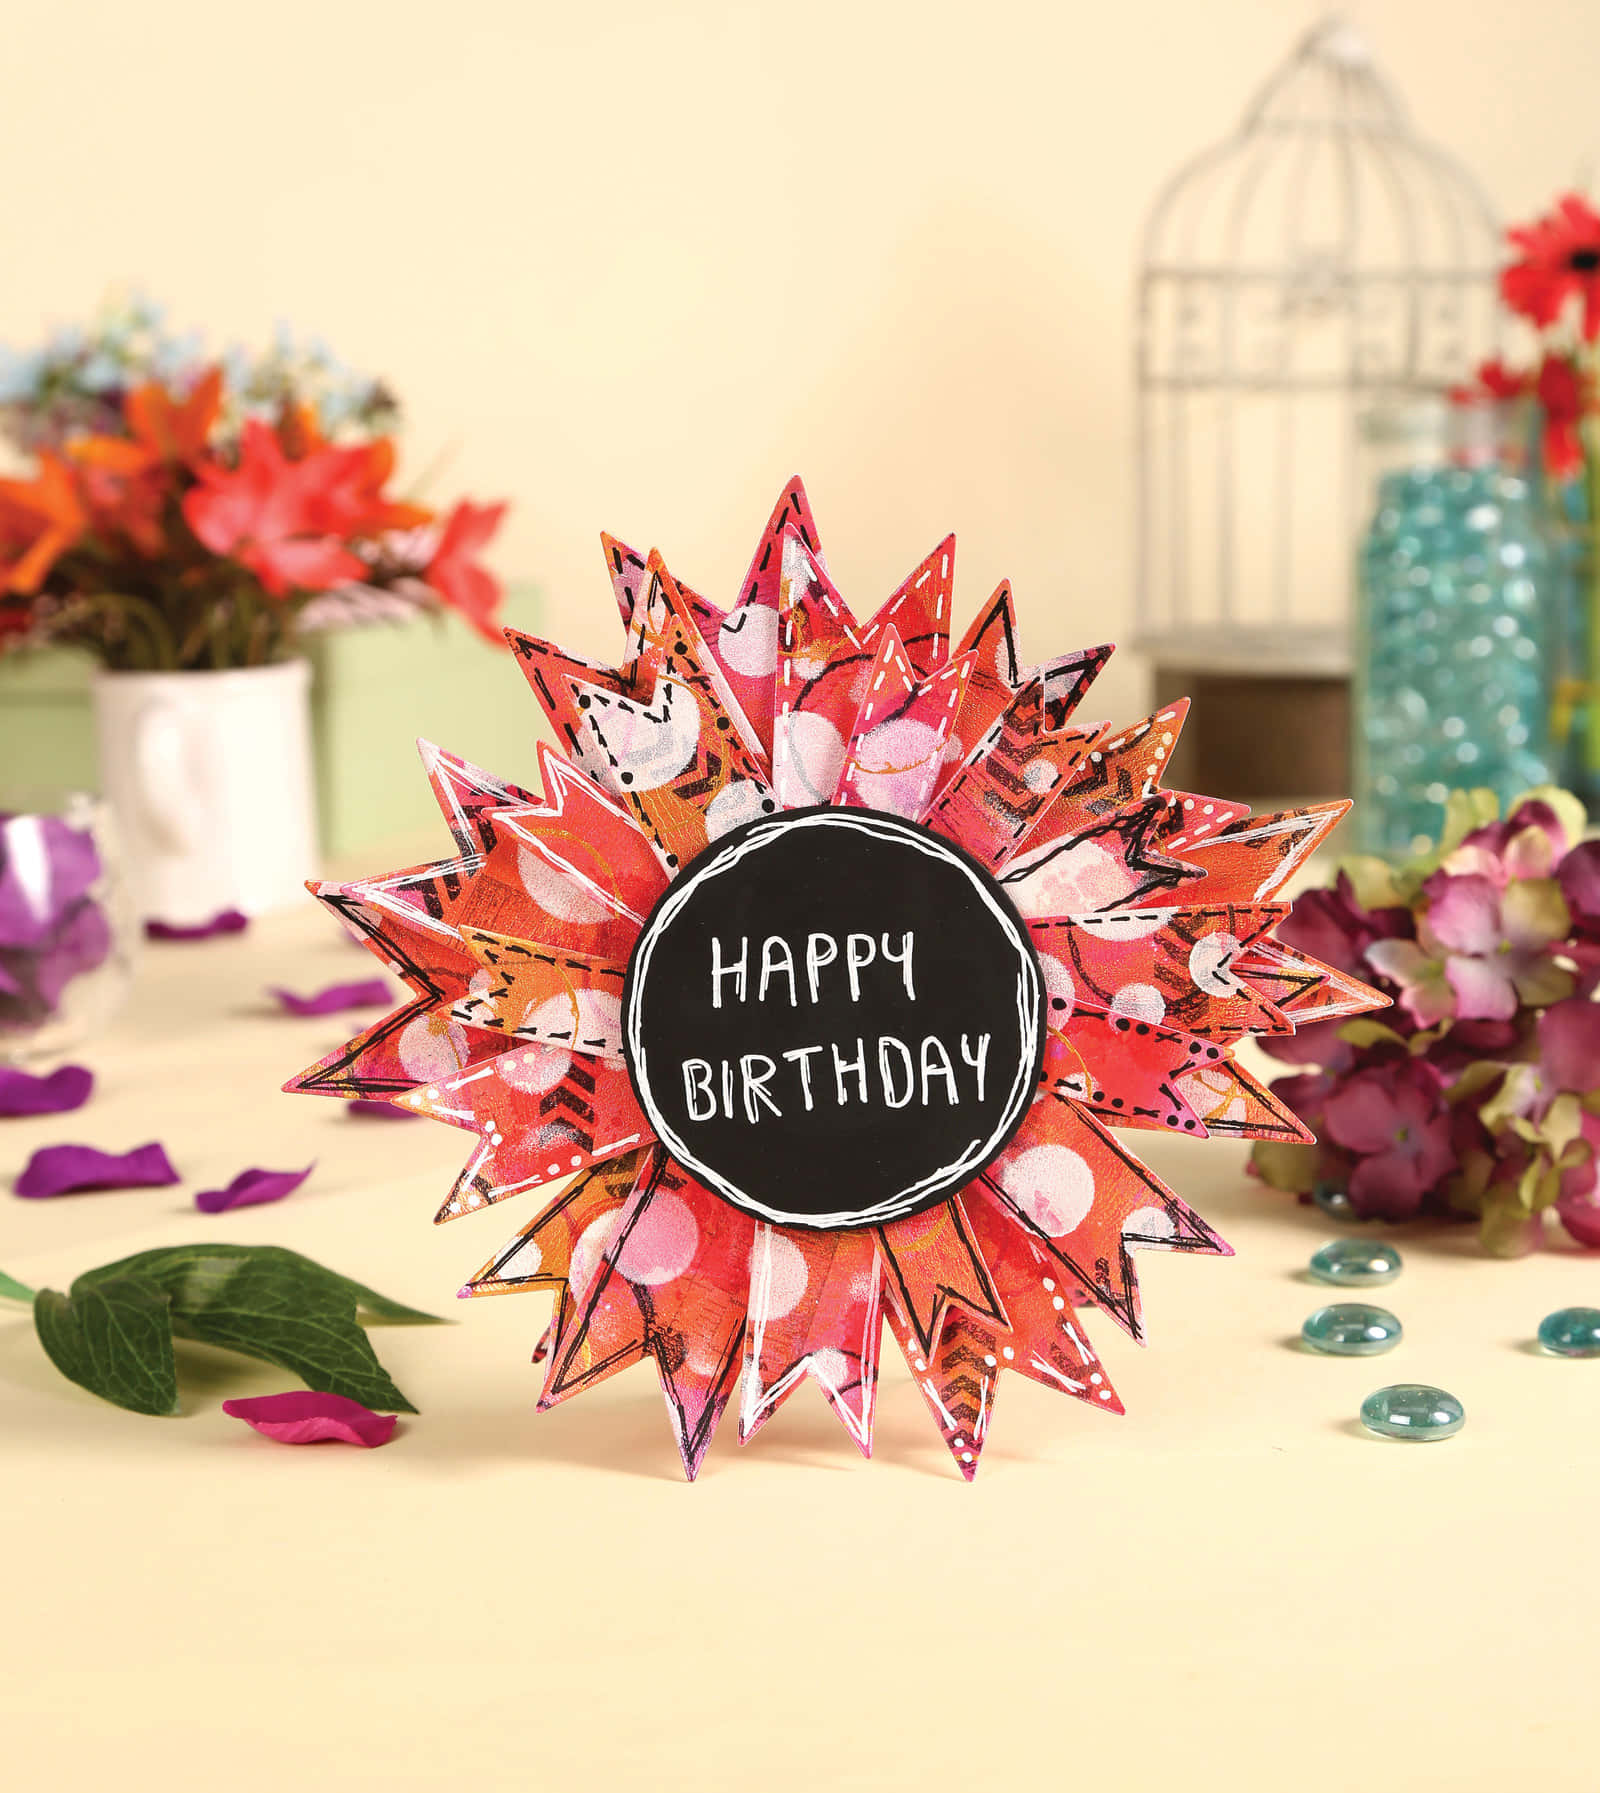 Celebrate your fall birthday surrounded by nature's bounty. Wallpaper